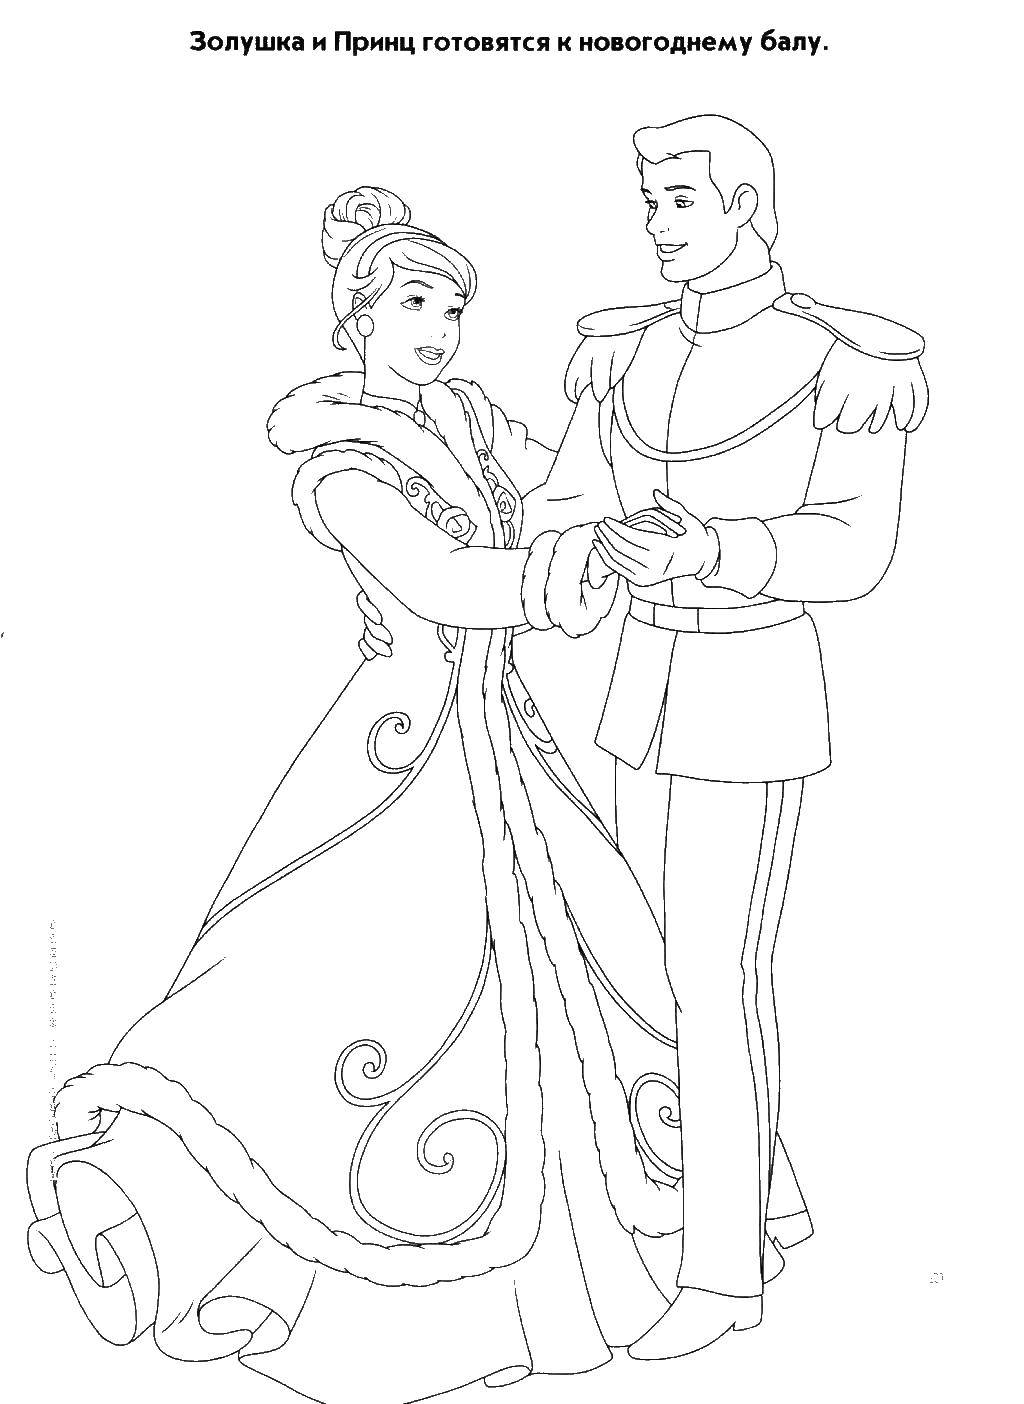 Coloring Cinderella and the Prince at the ball. Category Cinderella. Tags:  Cinderella, Prince, ball.